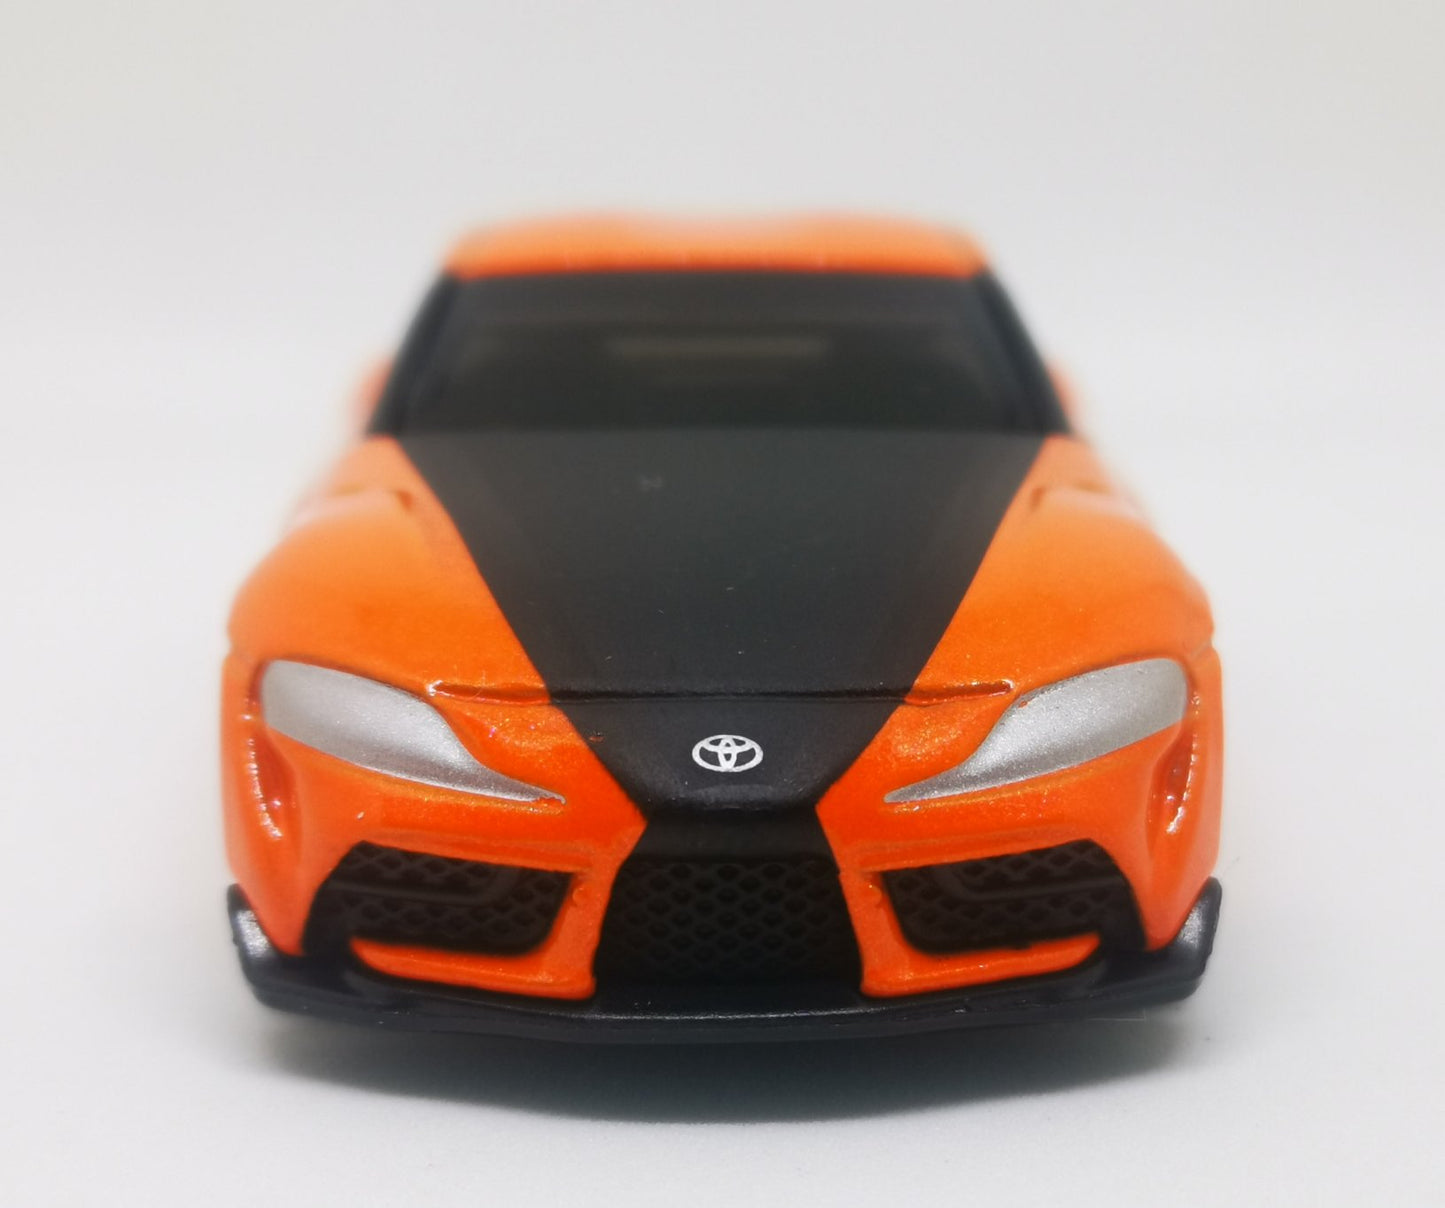 Tomica SP The Fast 9 Toyota GR Supra 1:64 Scale